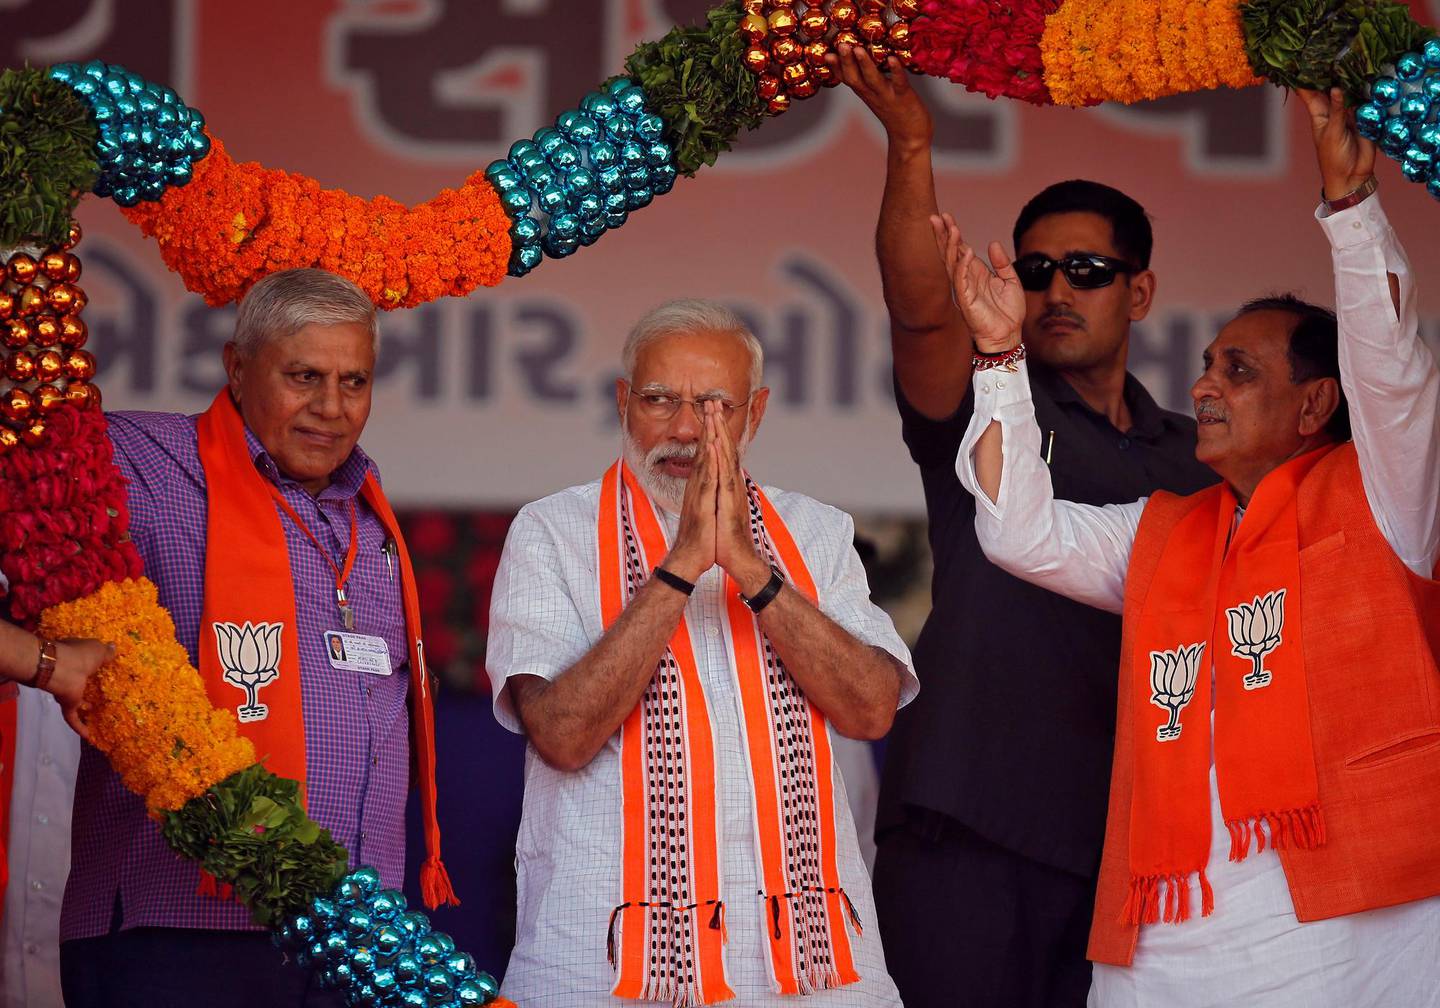 India's Prime Minister Narendra Modi gestures as he is presented with a garland during an election campaign rally in Junagadh, Gujarat, India, April 10, 2019. REUTERS/Amit Dave